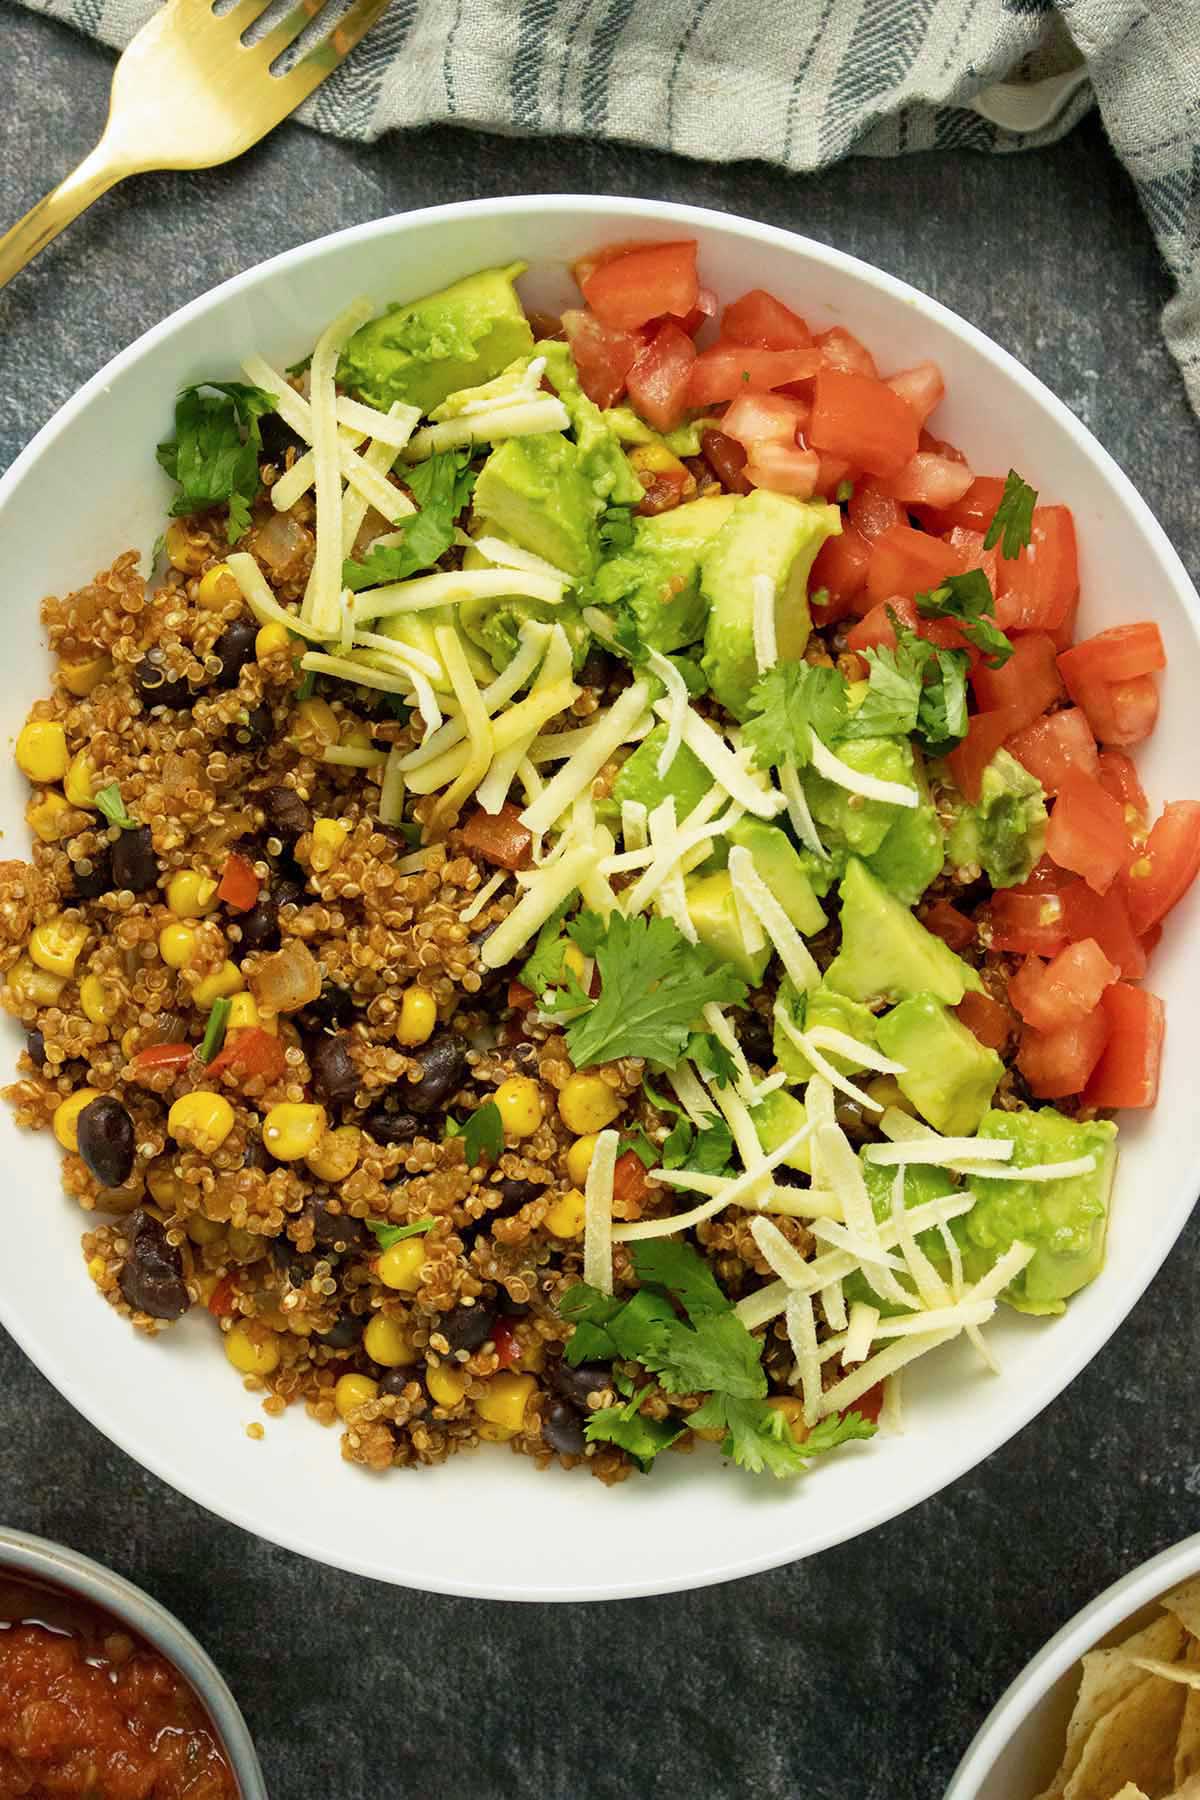 Instant Pot quinoa burrito bowl with beans, corn, and red peppers topped with avocado, tomato, cilantro, and vegan cheese shreds